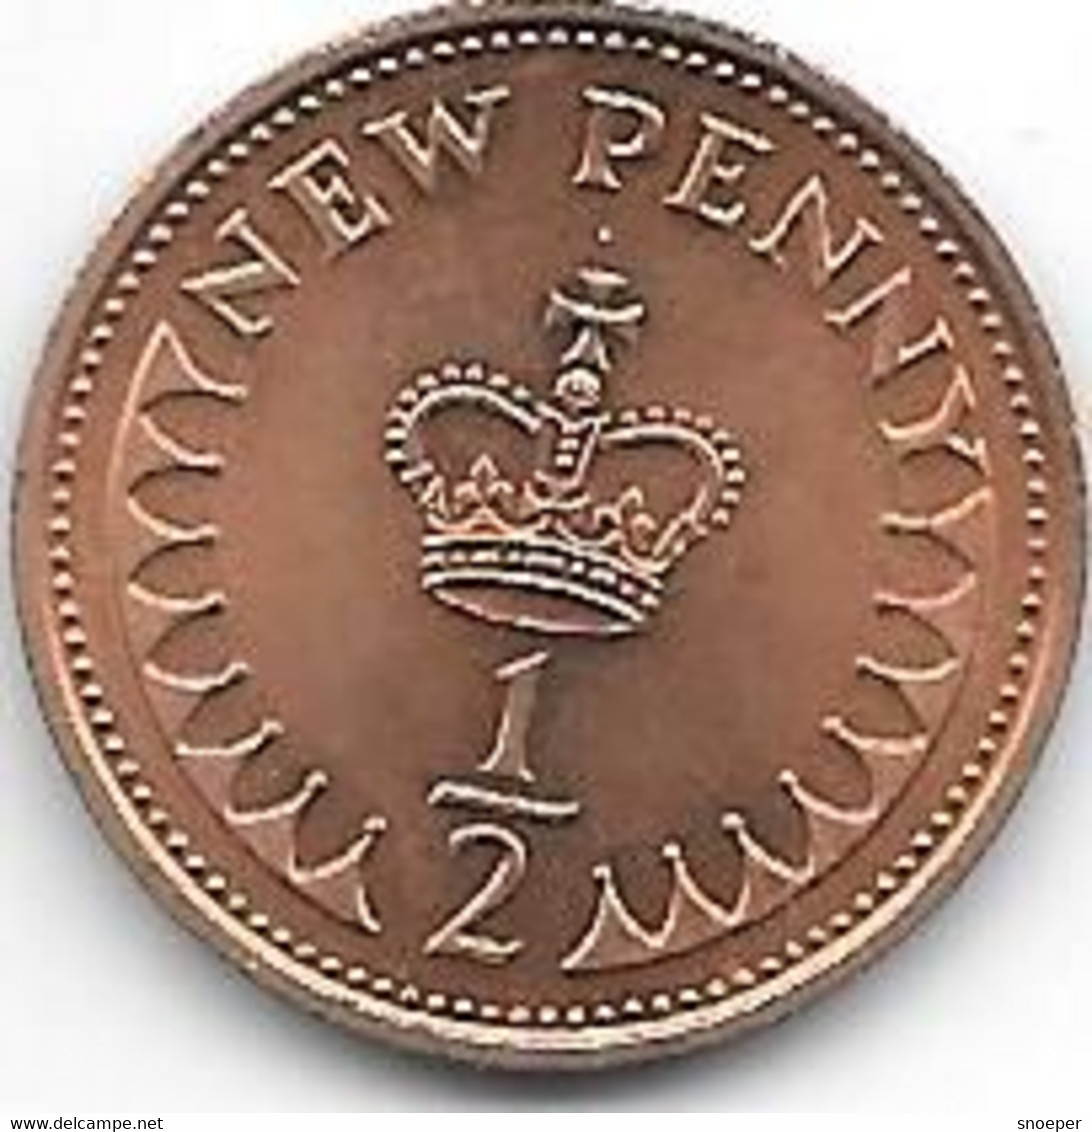 Great Britain 1/2 Penny 1971  Km 914  Unc/ms63 Catalog Val Ngc 2$ - 1/2 Penny & 1/2 New Penny